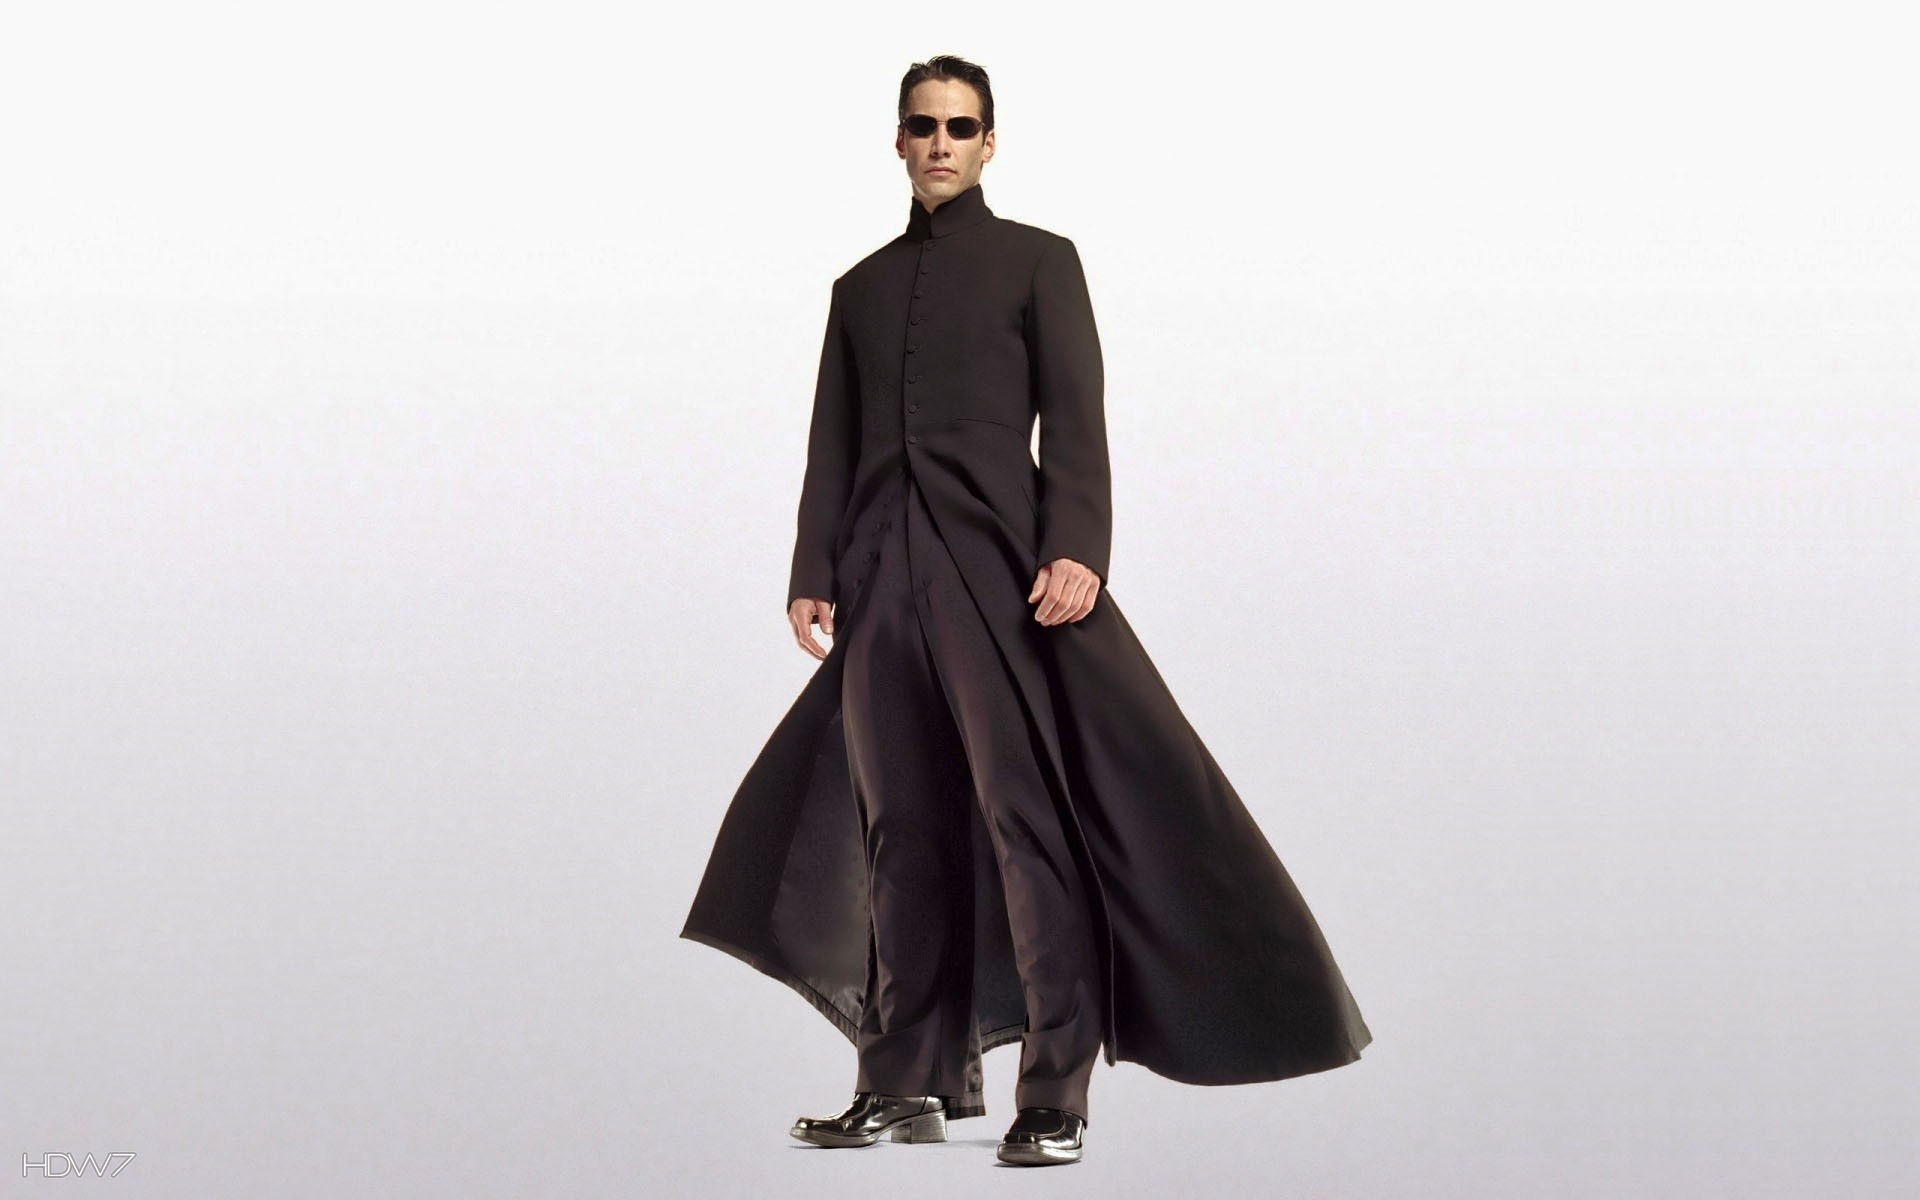 Neo Keanu Reeves The Matrix Reloaded